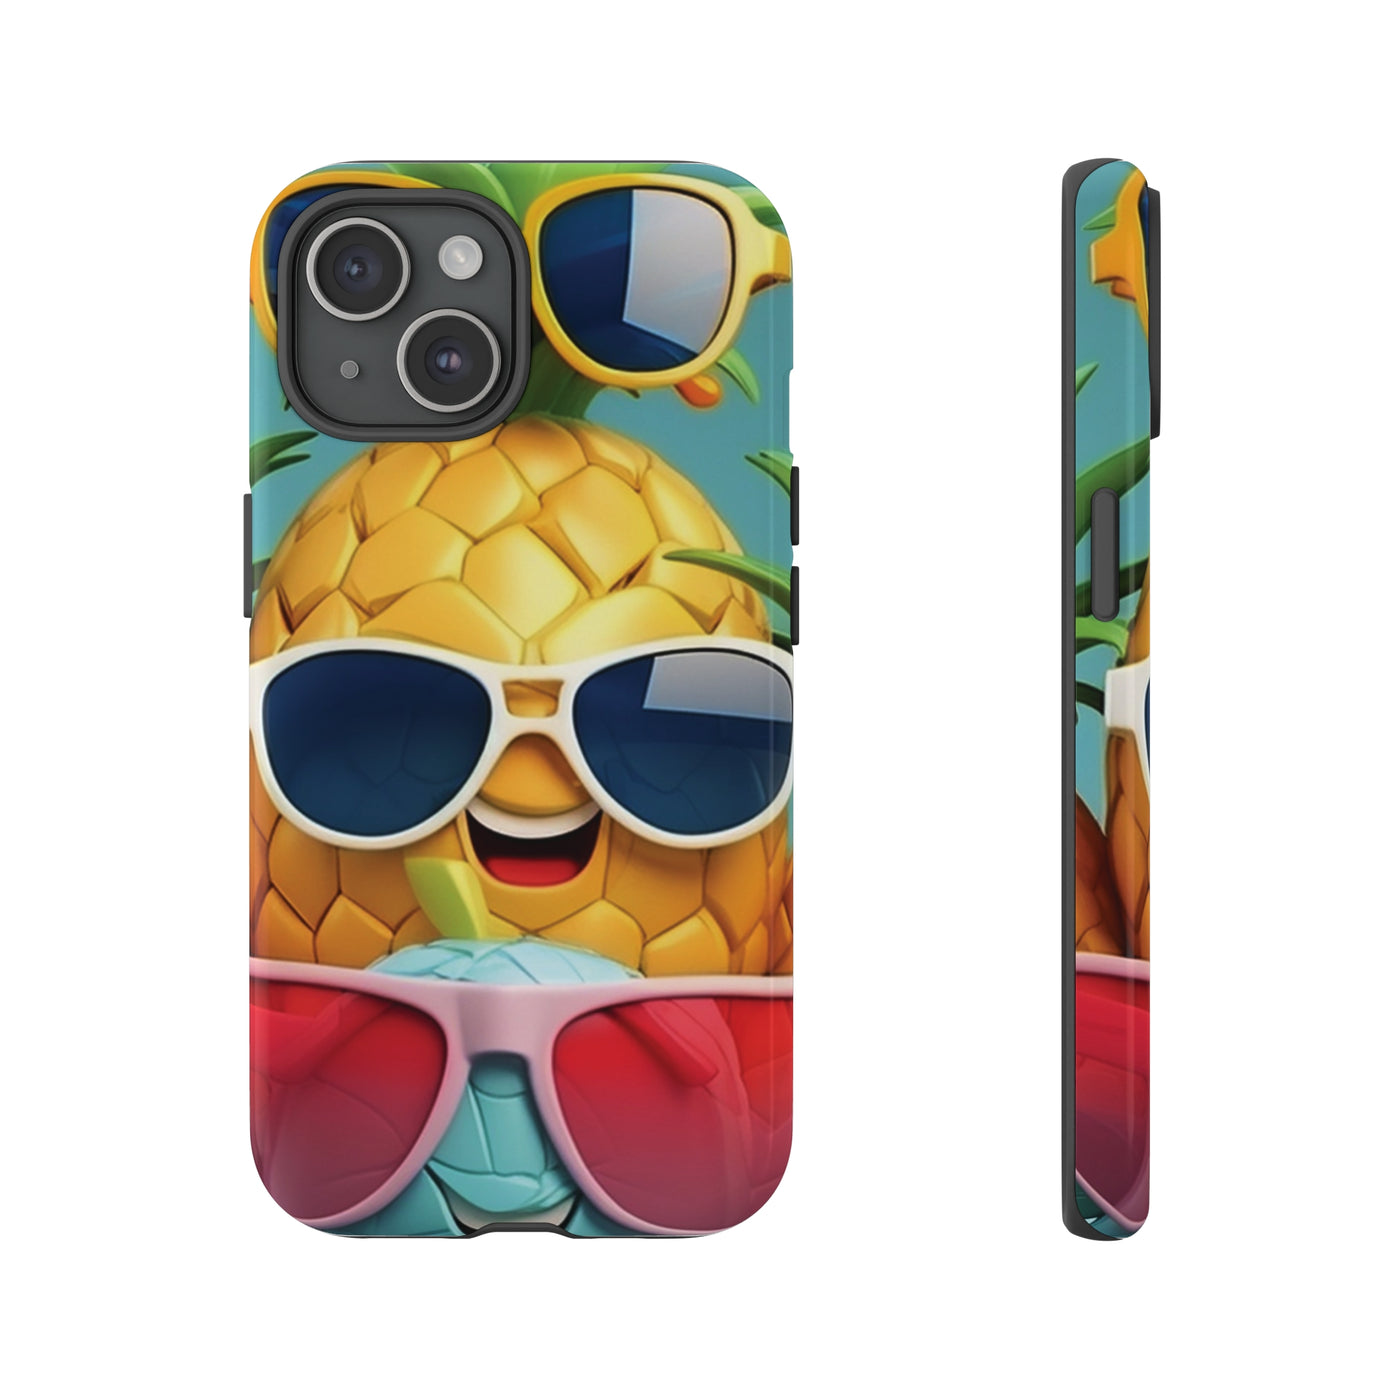 Cute IPhone Case | Summer Pineapple Fruit, iPhone 15 Case | iPhone 15 Pro Case, Iphone 14 Case, Iphone 14 Pro Max Case, Protective Iphone Case